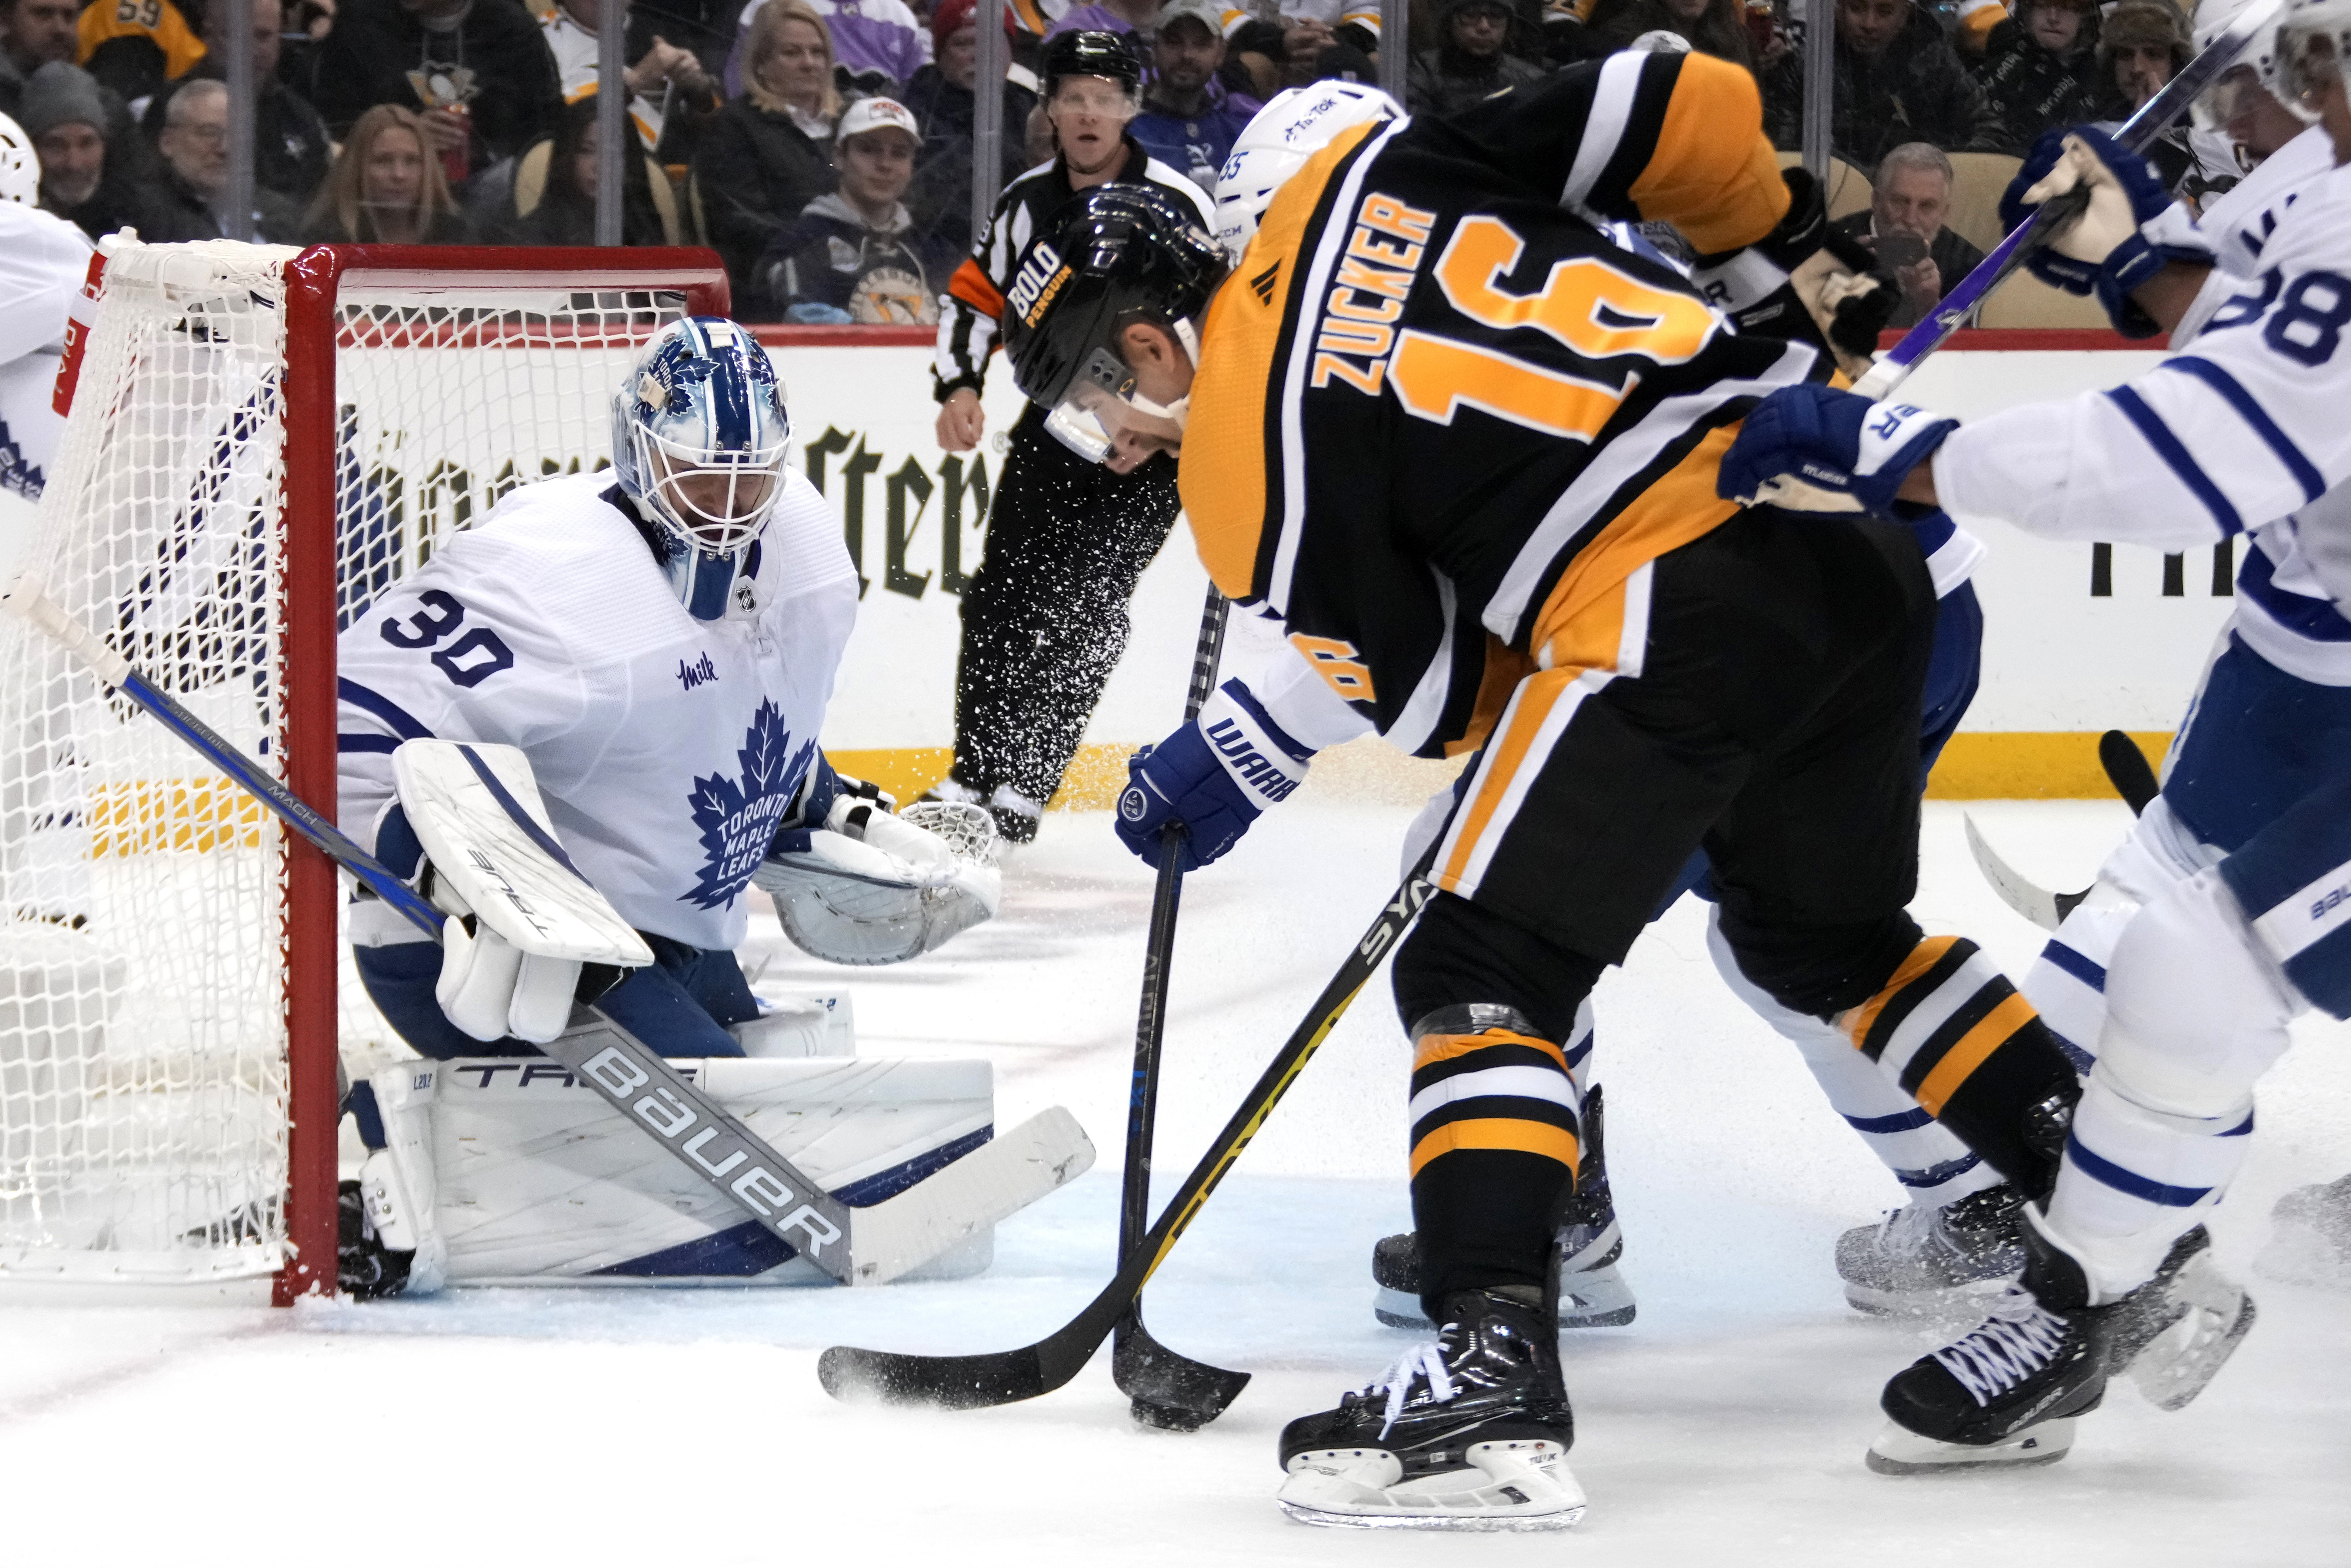 Murray shines in return to Pittsburgh as Leafs top Pens 5-2